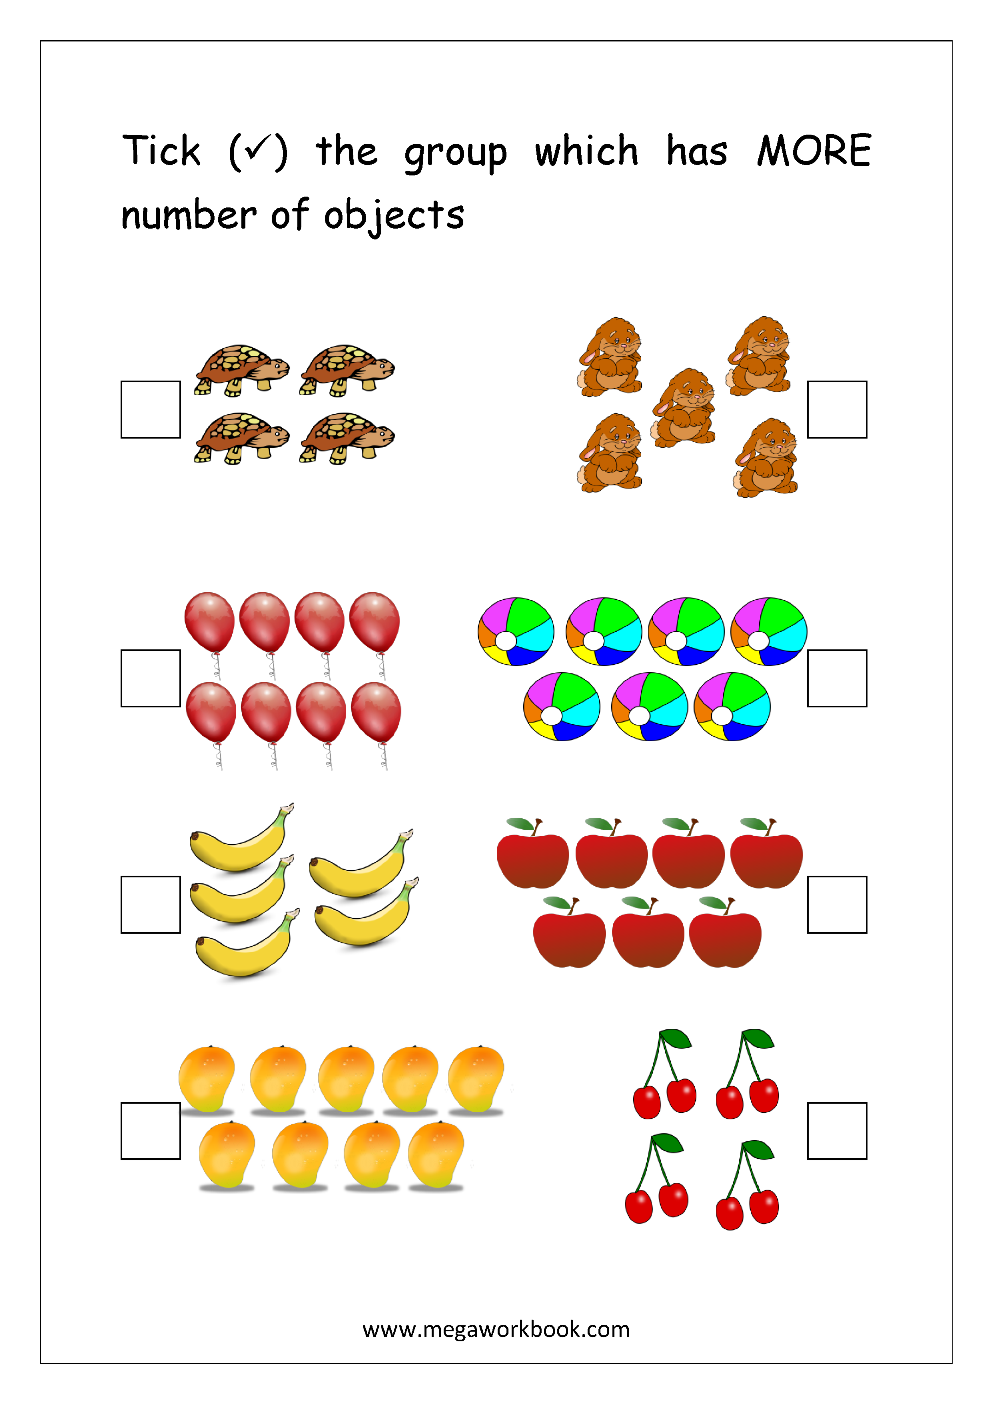 comparing-numbers-1-10-worksheets-kindergarten-kids-are-asked-to-compare-two-numbers-and